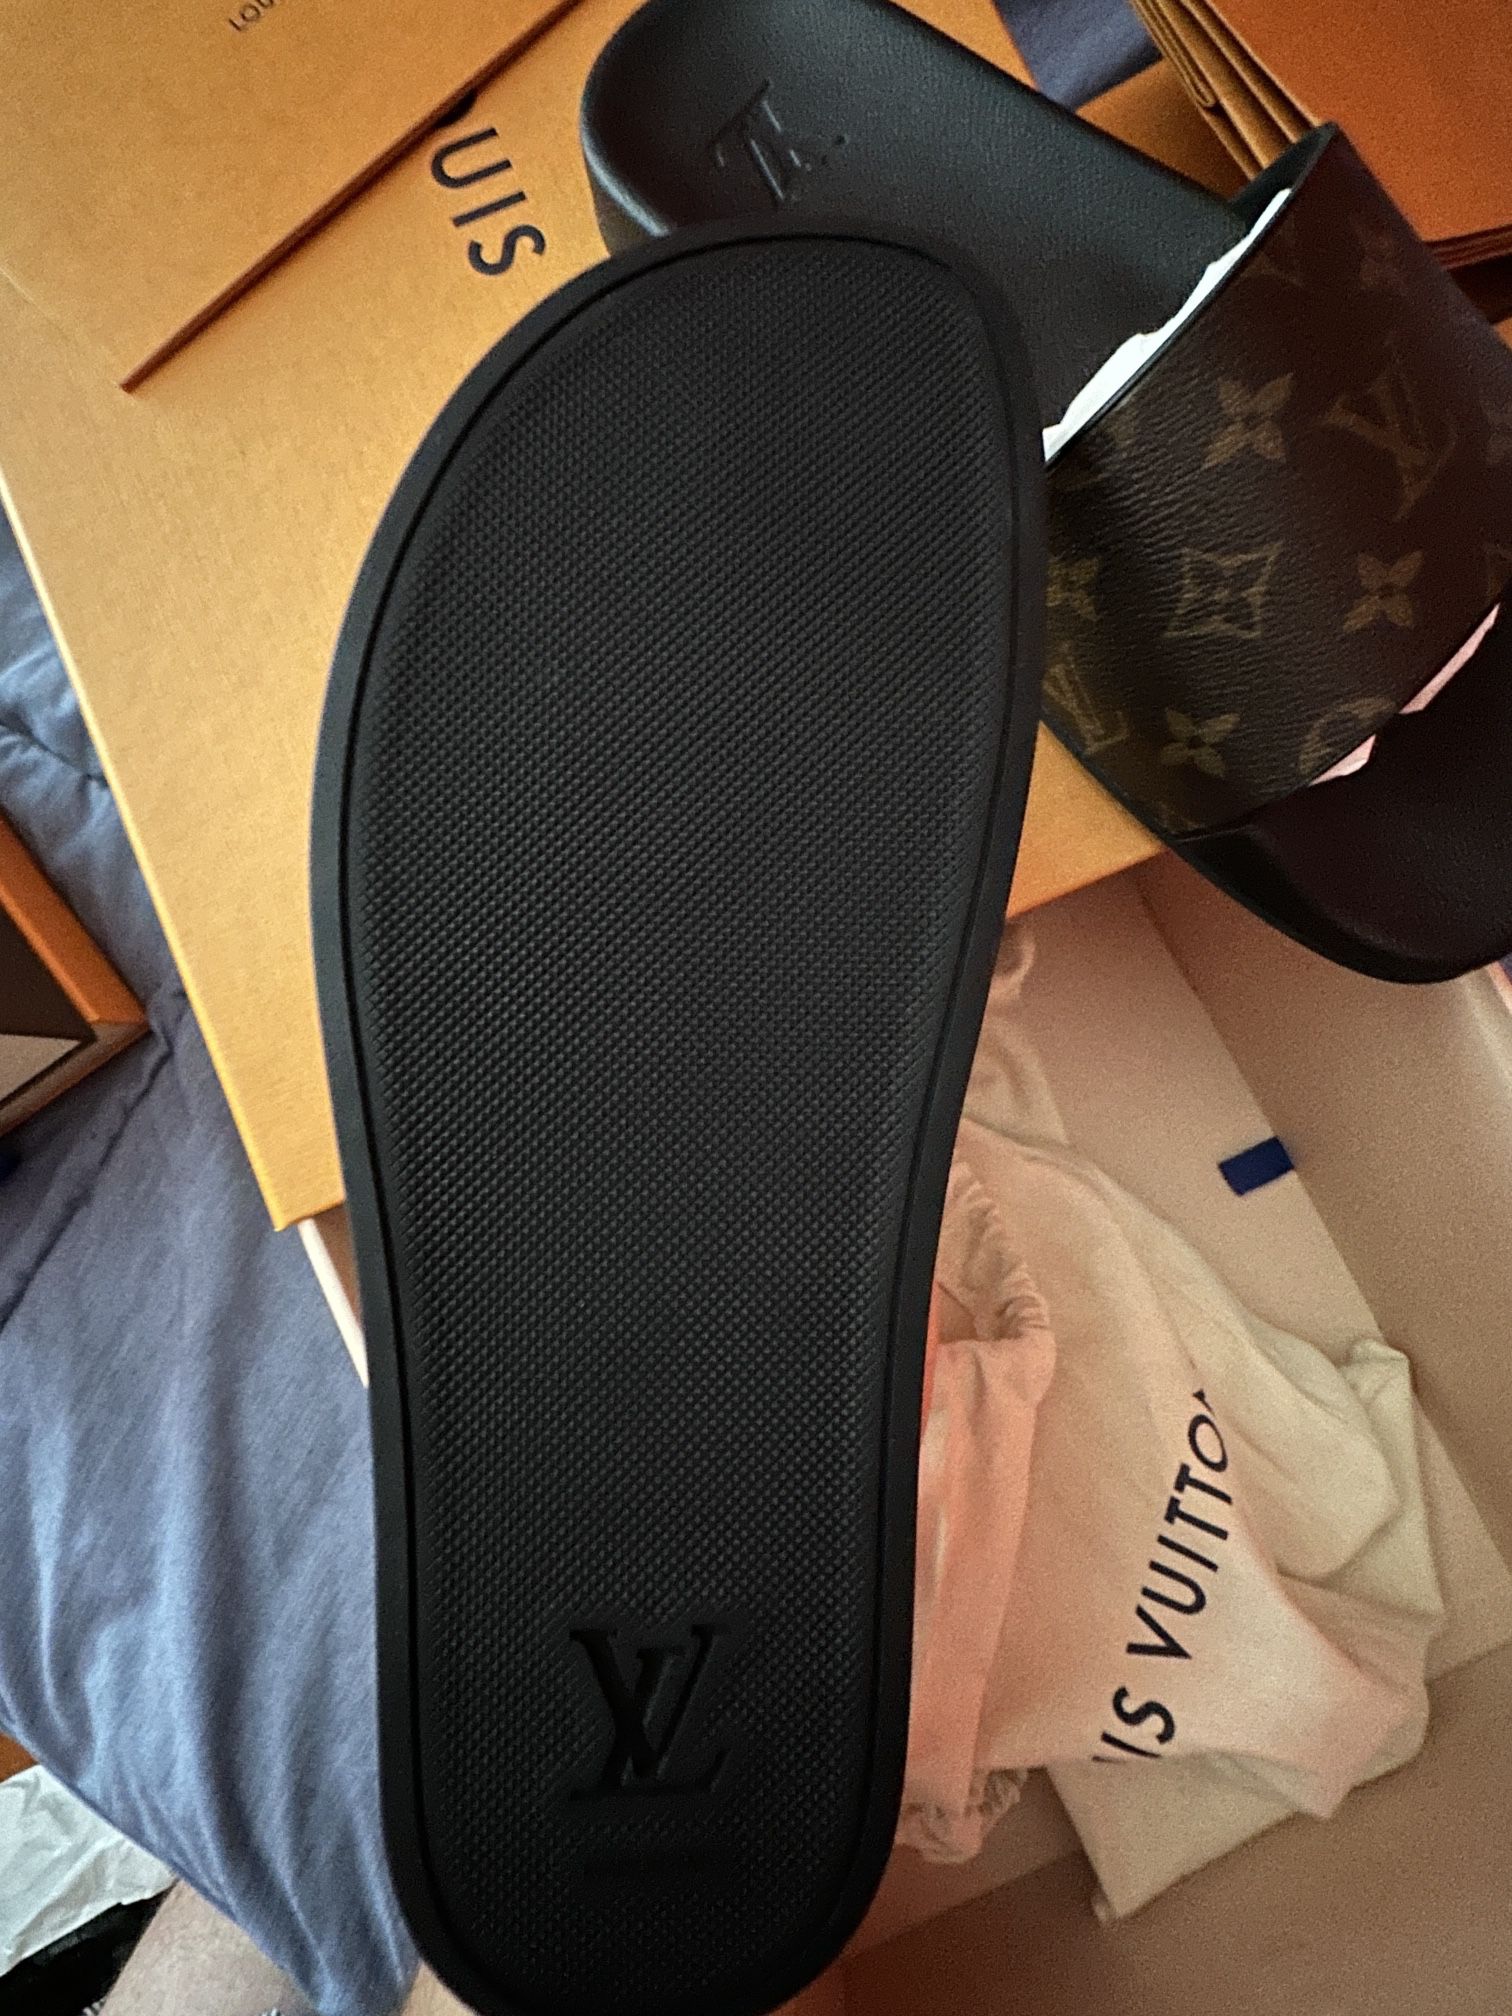 Size 10 Louis Vuitton WaterFront Mule Black Slides for Sale in South  Hempstead, NY - OfferUp